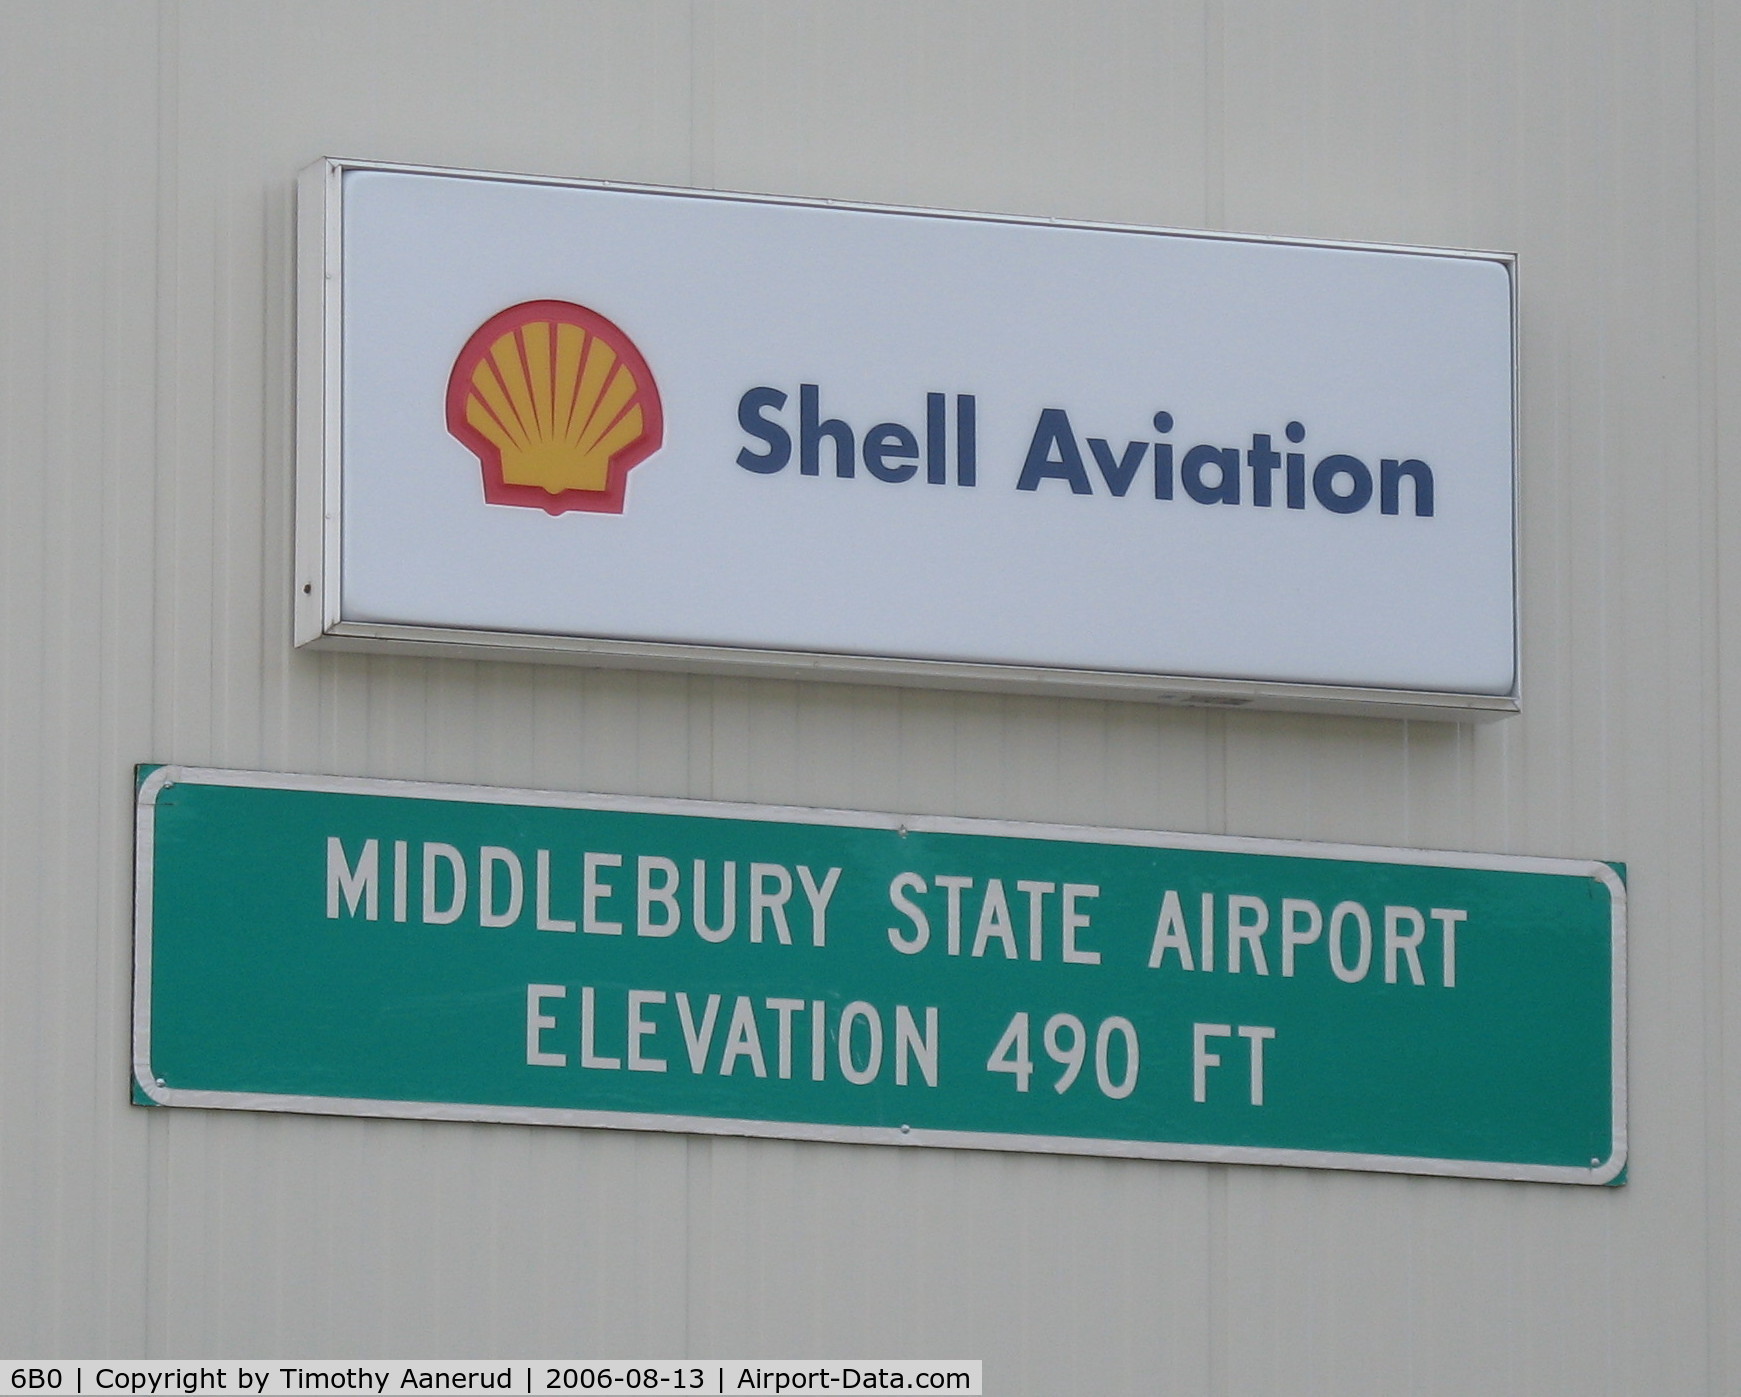 Middlebury State Airport (6B0) - signage